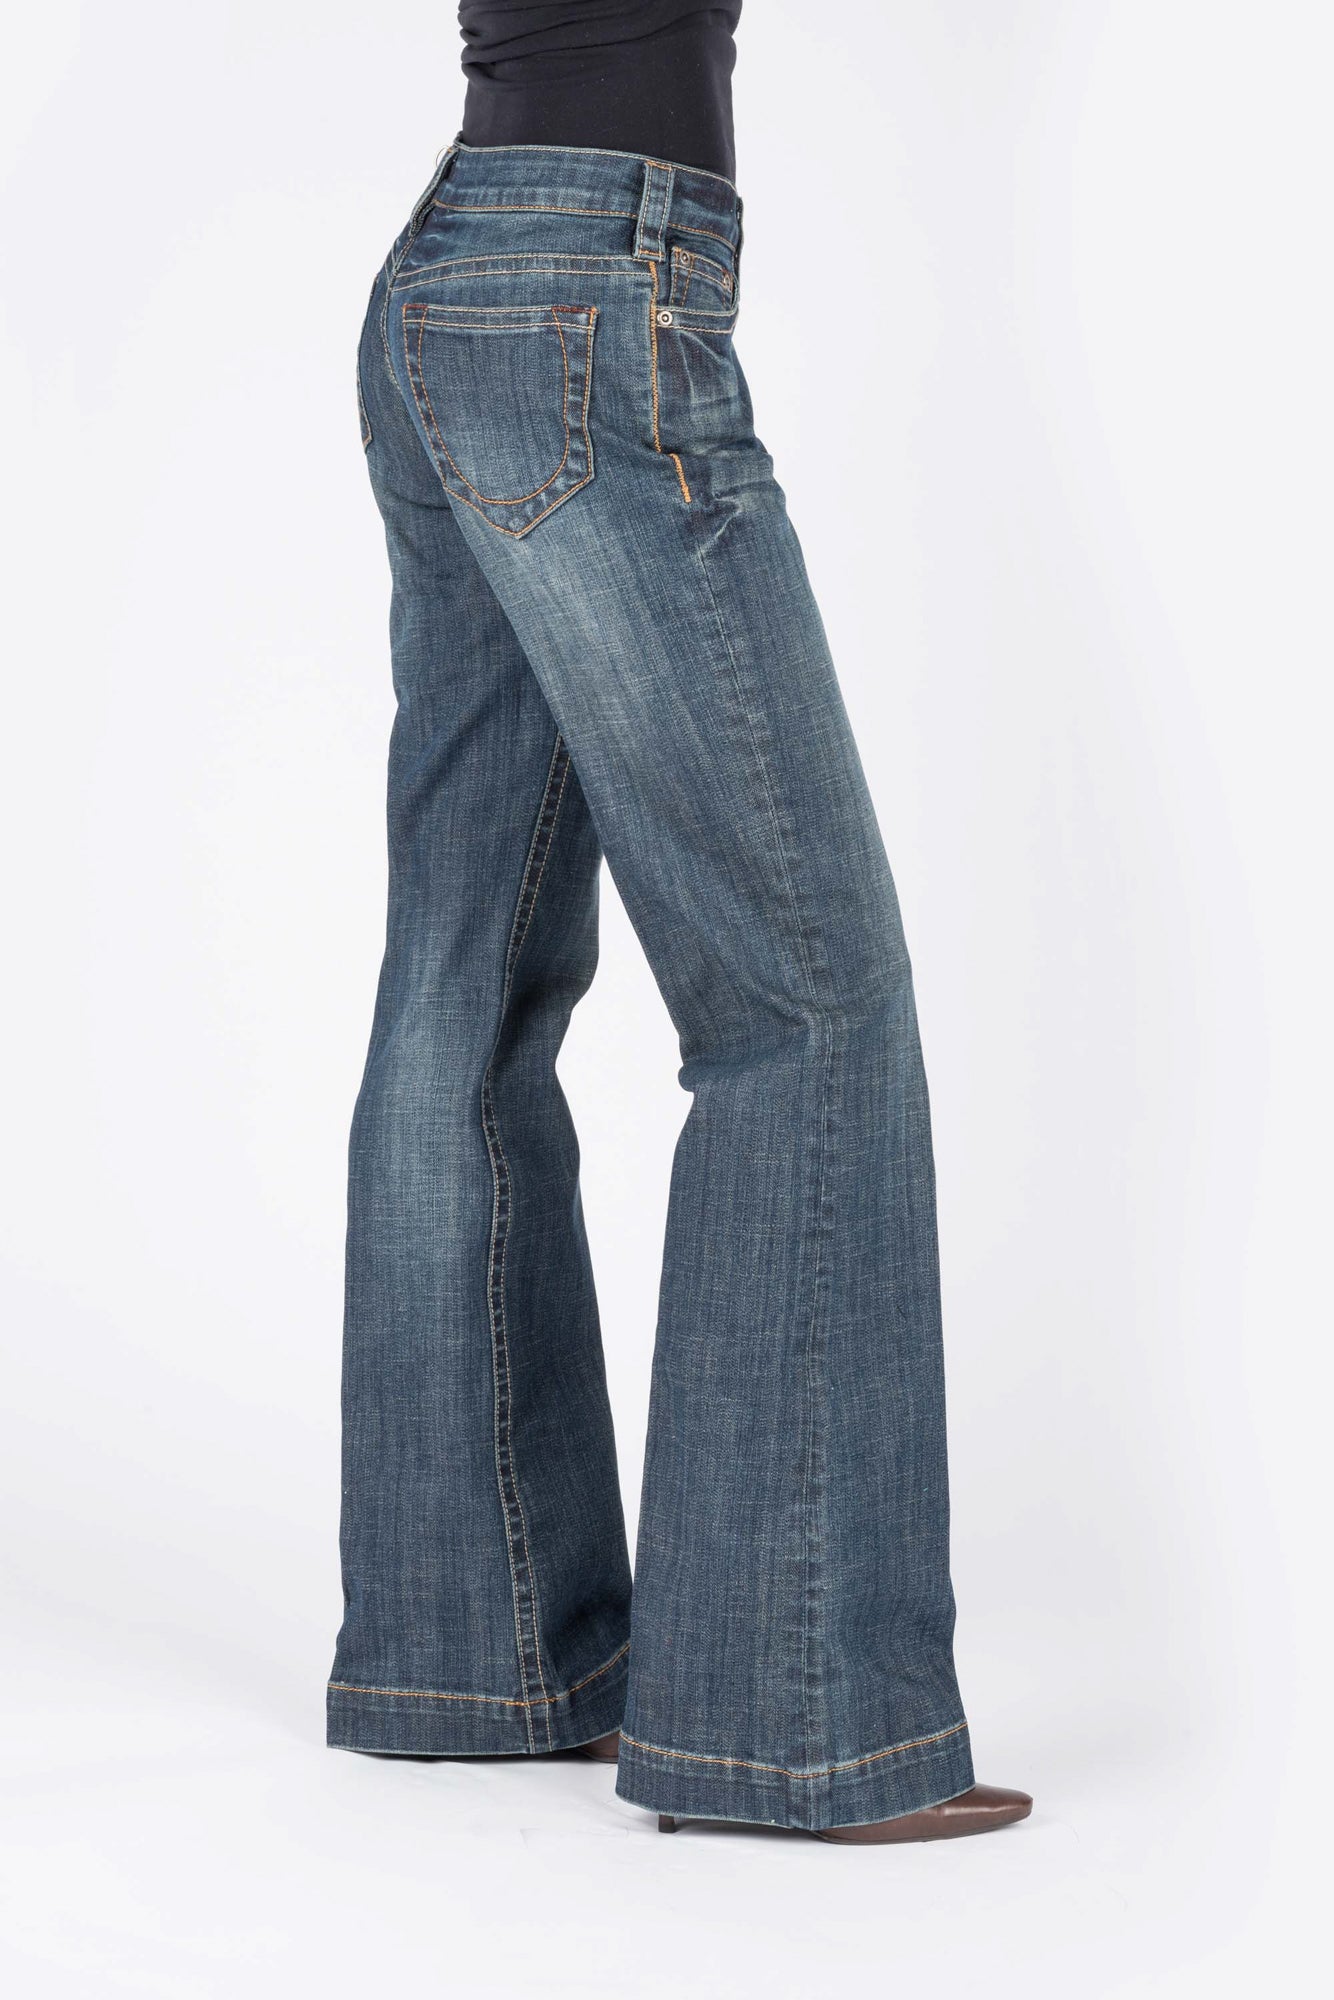 Stetson Womens Blue Cotton Blend Circle Stitch Jeans – The Western Company